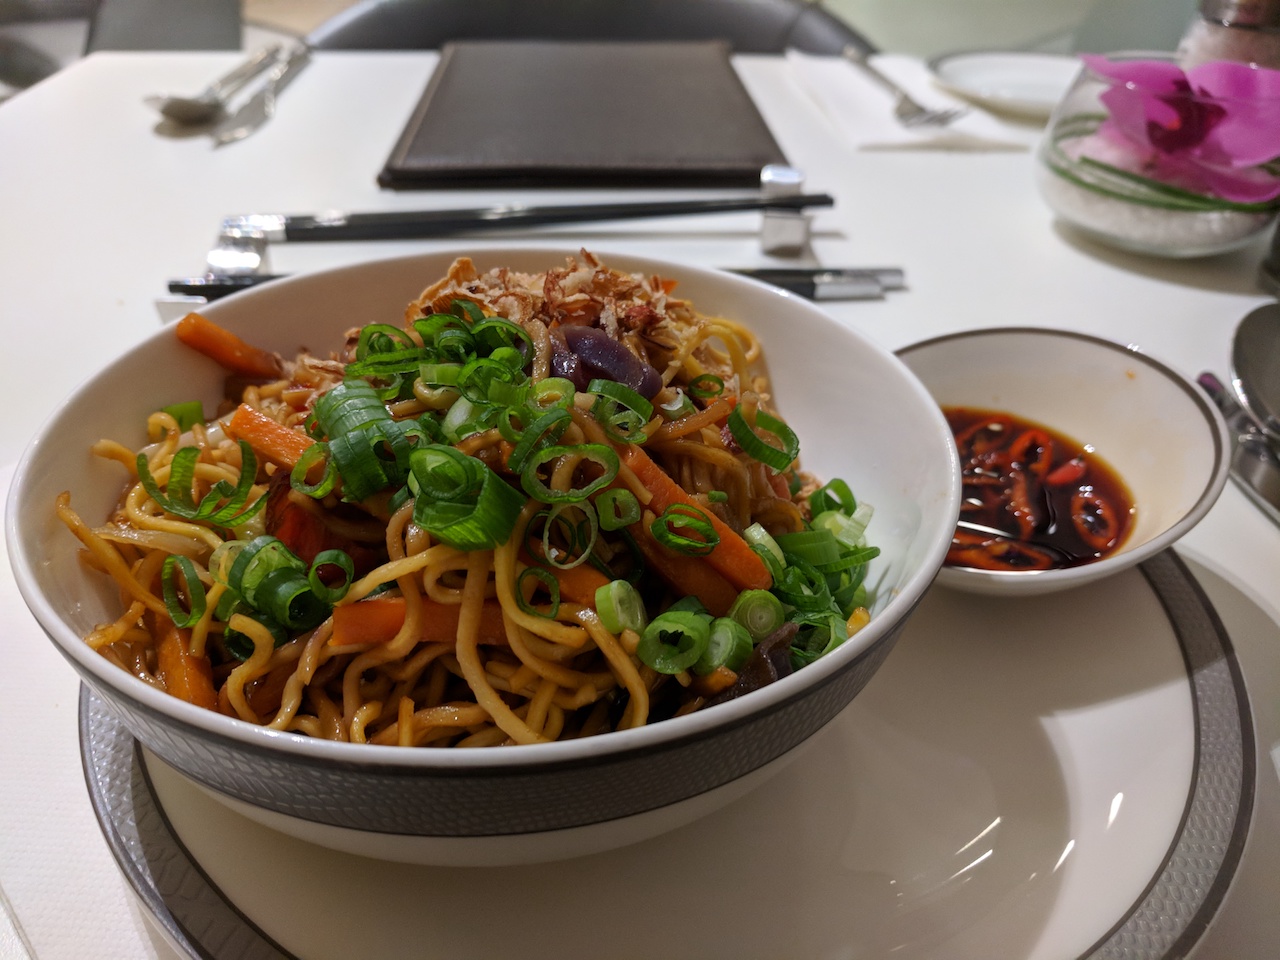 a bowl of noodles with vegetables and sauce